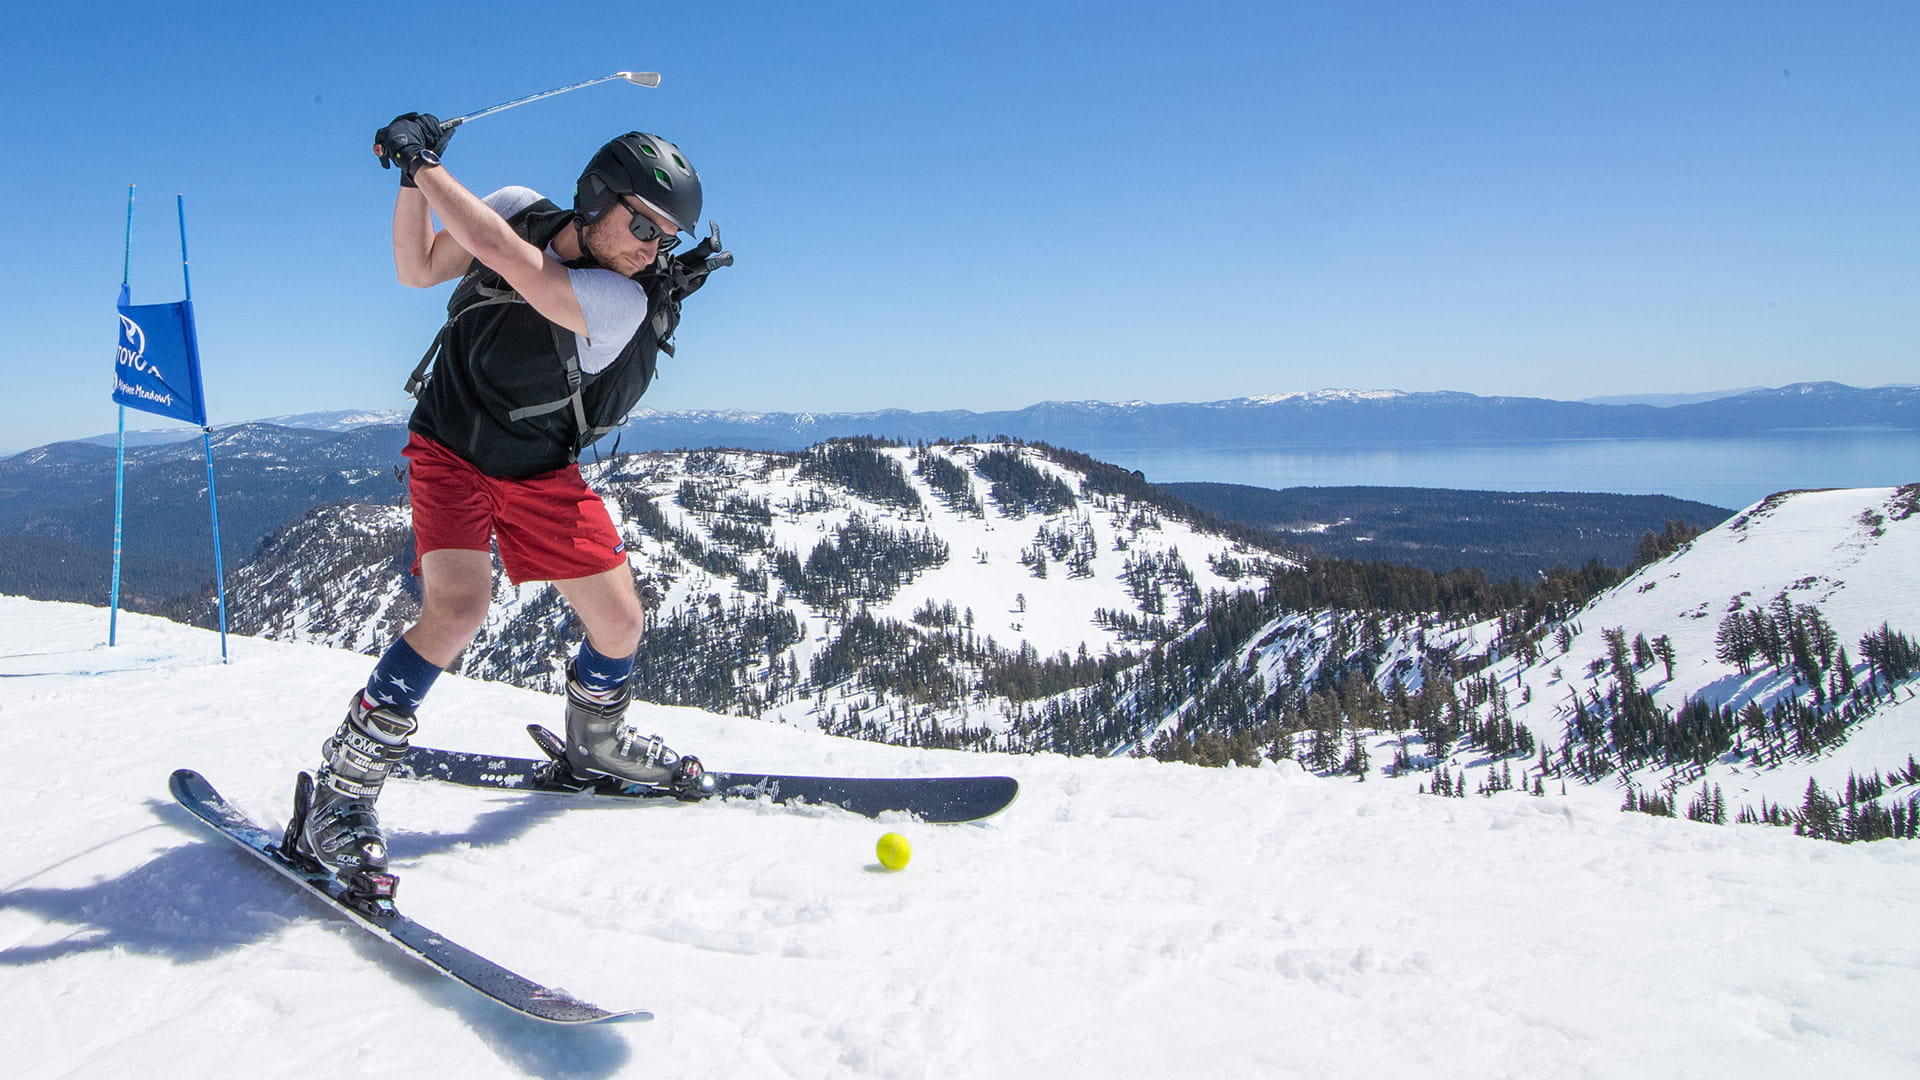 Skier participating in the Alpine Snow Golf Tournament with Lake Tahoe in the background